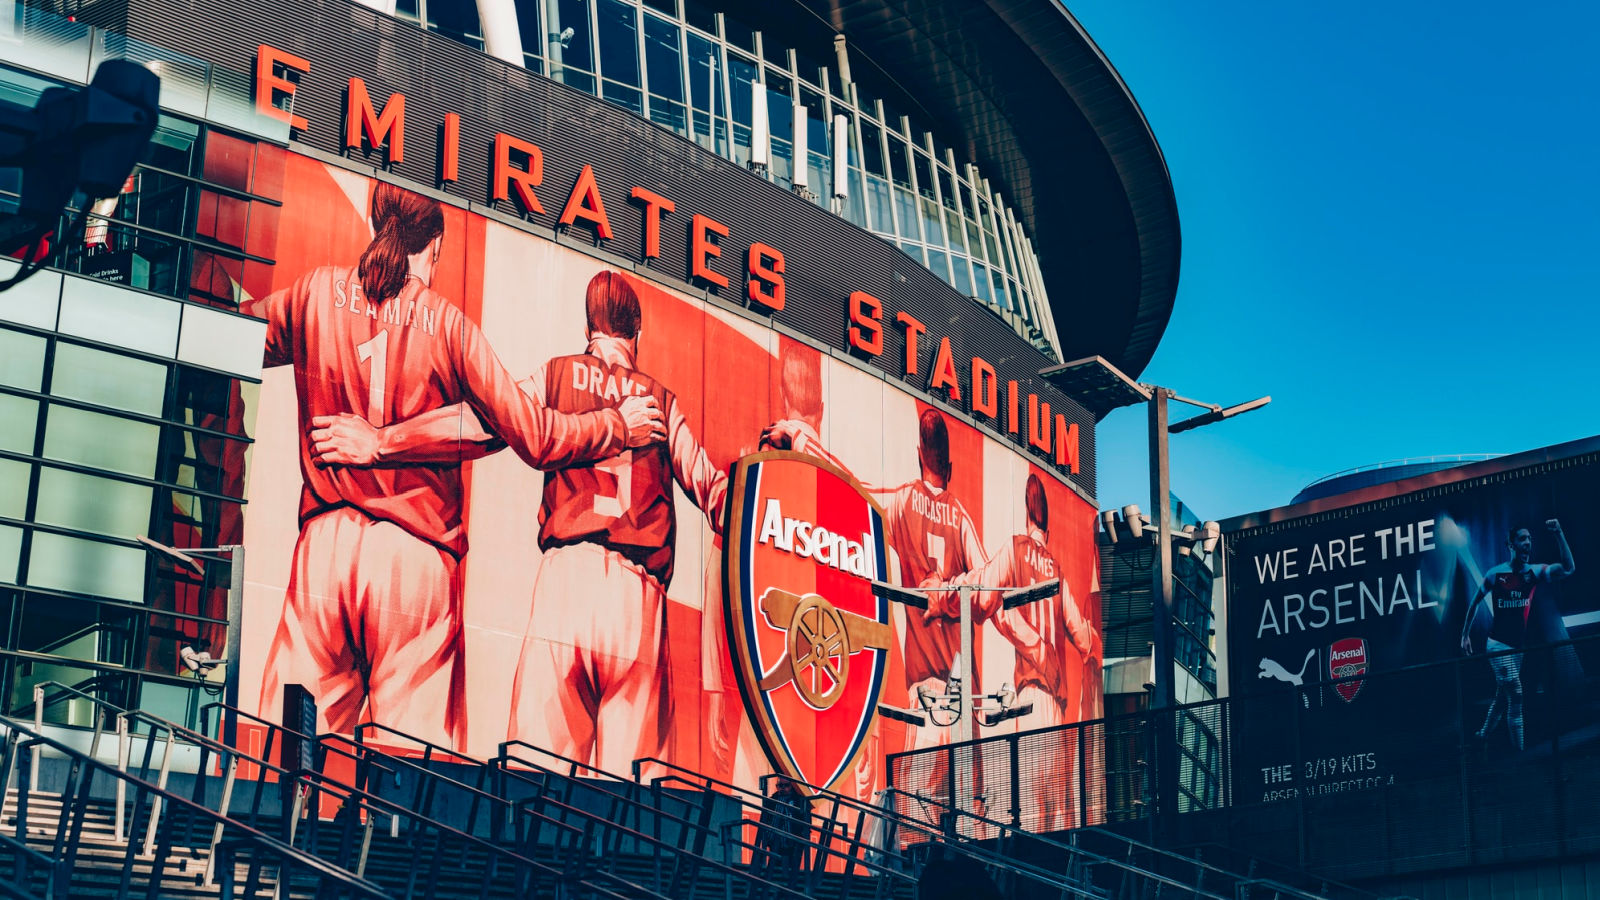 Photo: The Arsenal crest at the Emirates appears to be in tatters